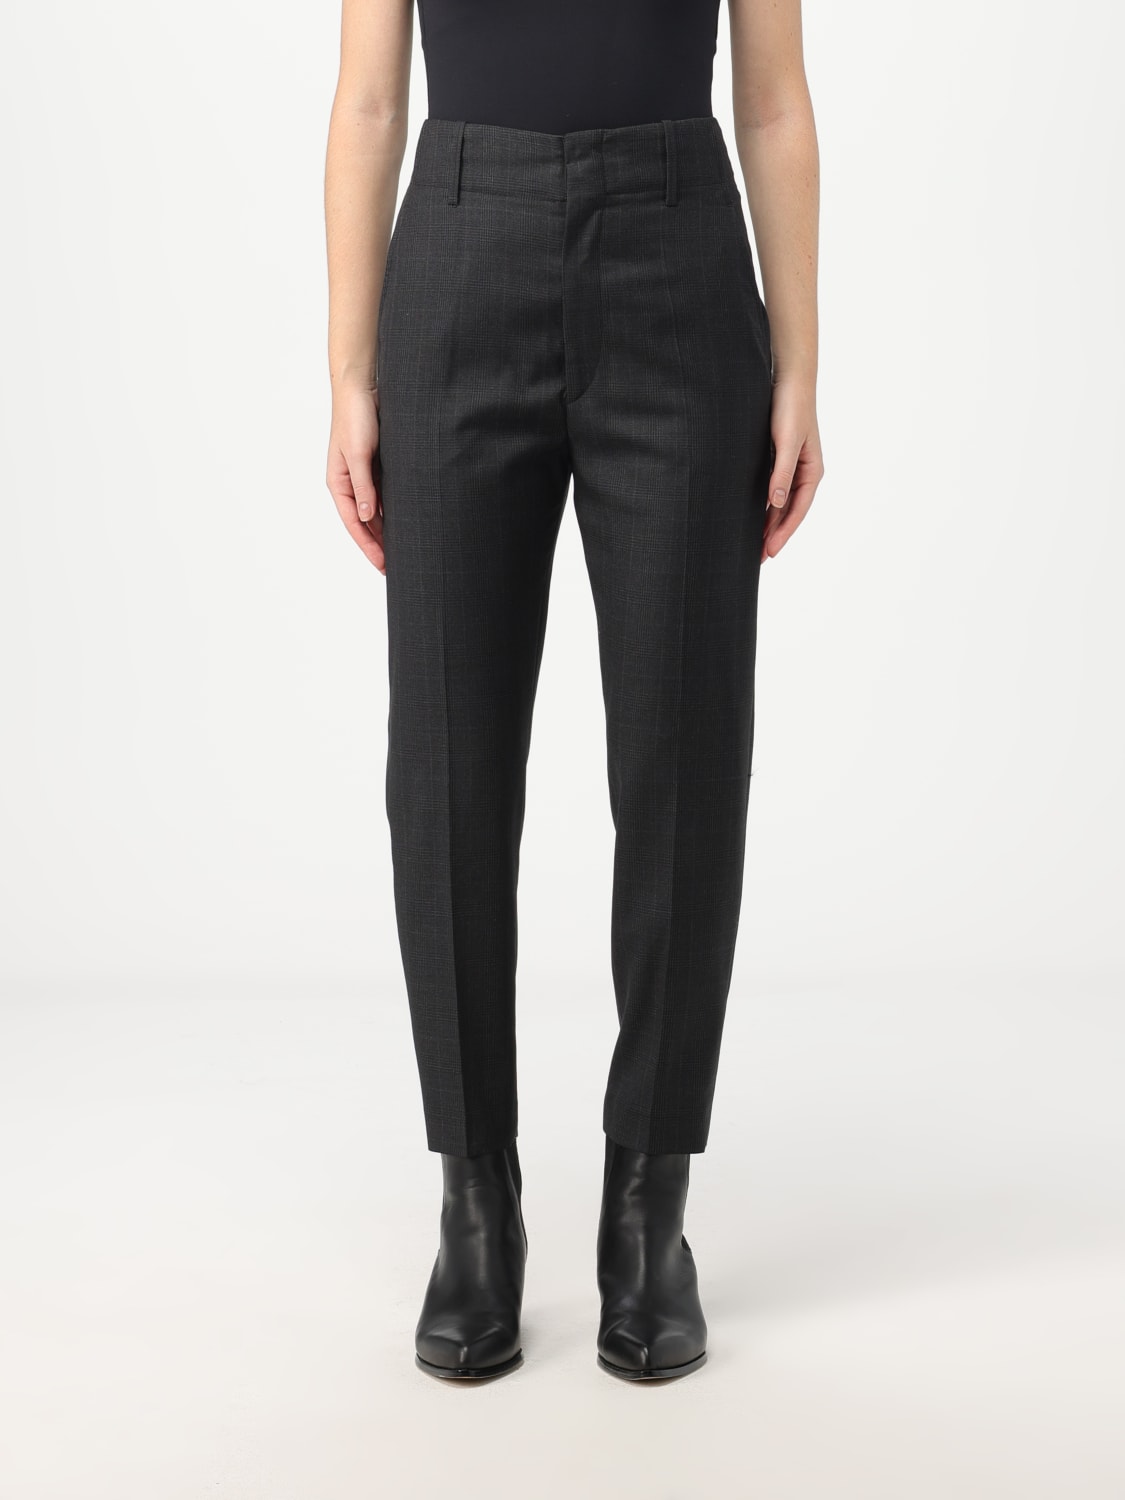 ISABEL MARANT: trousers women - Grey | Isabel Marant trousers PA0201FAA3F04I online at GIGLIO.COM